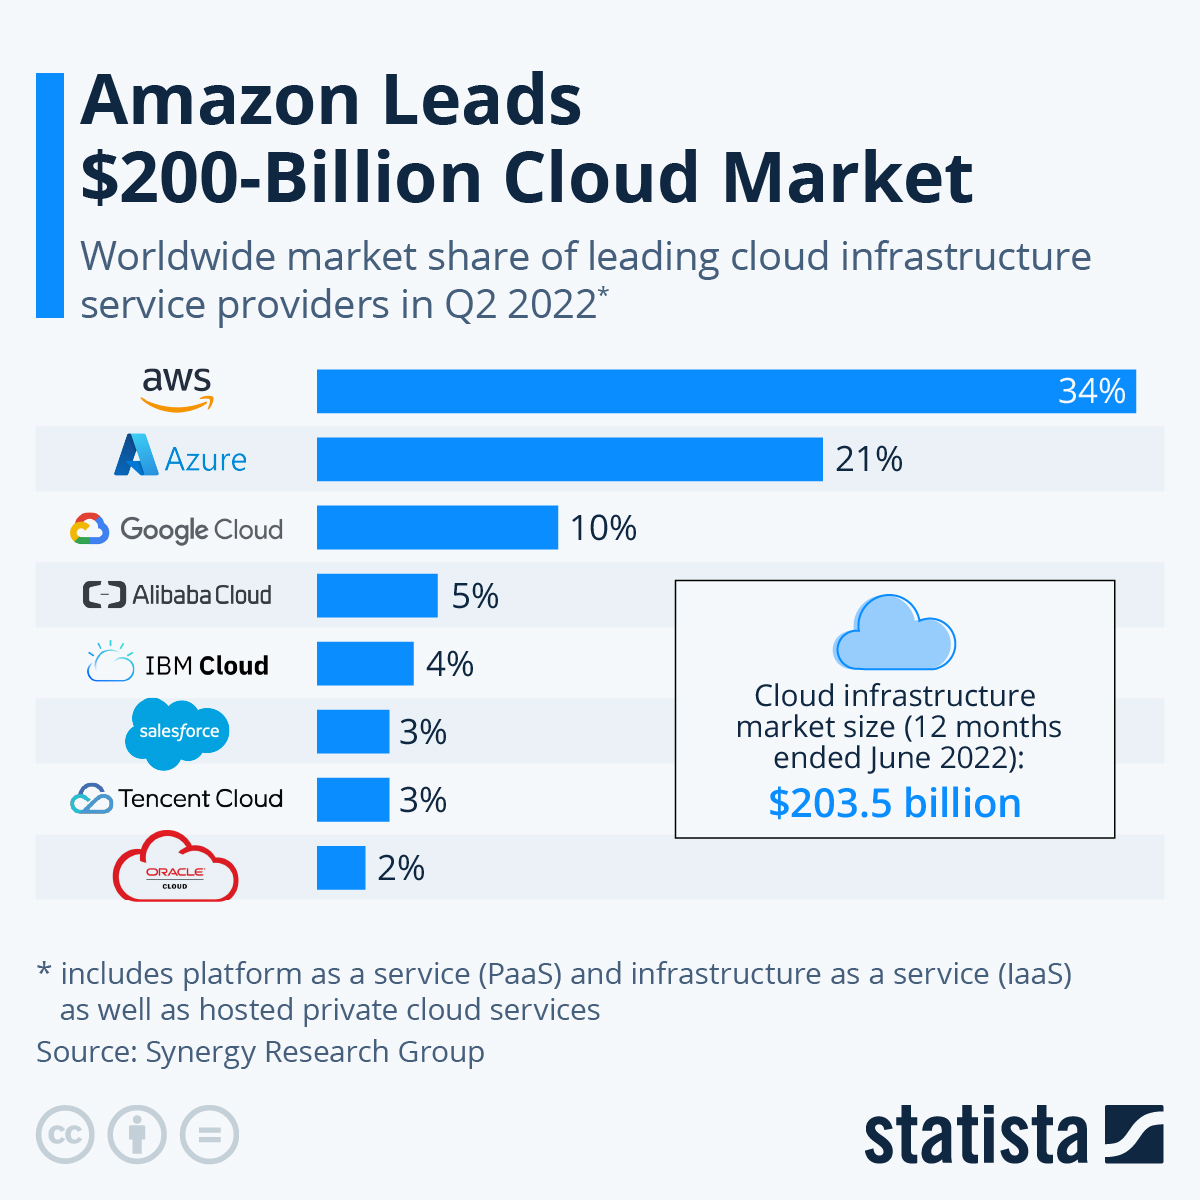 Amazon Becomes The Leader of $200-Billion Cloud Market